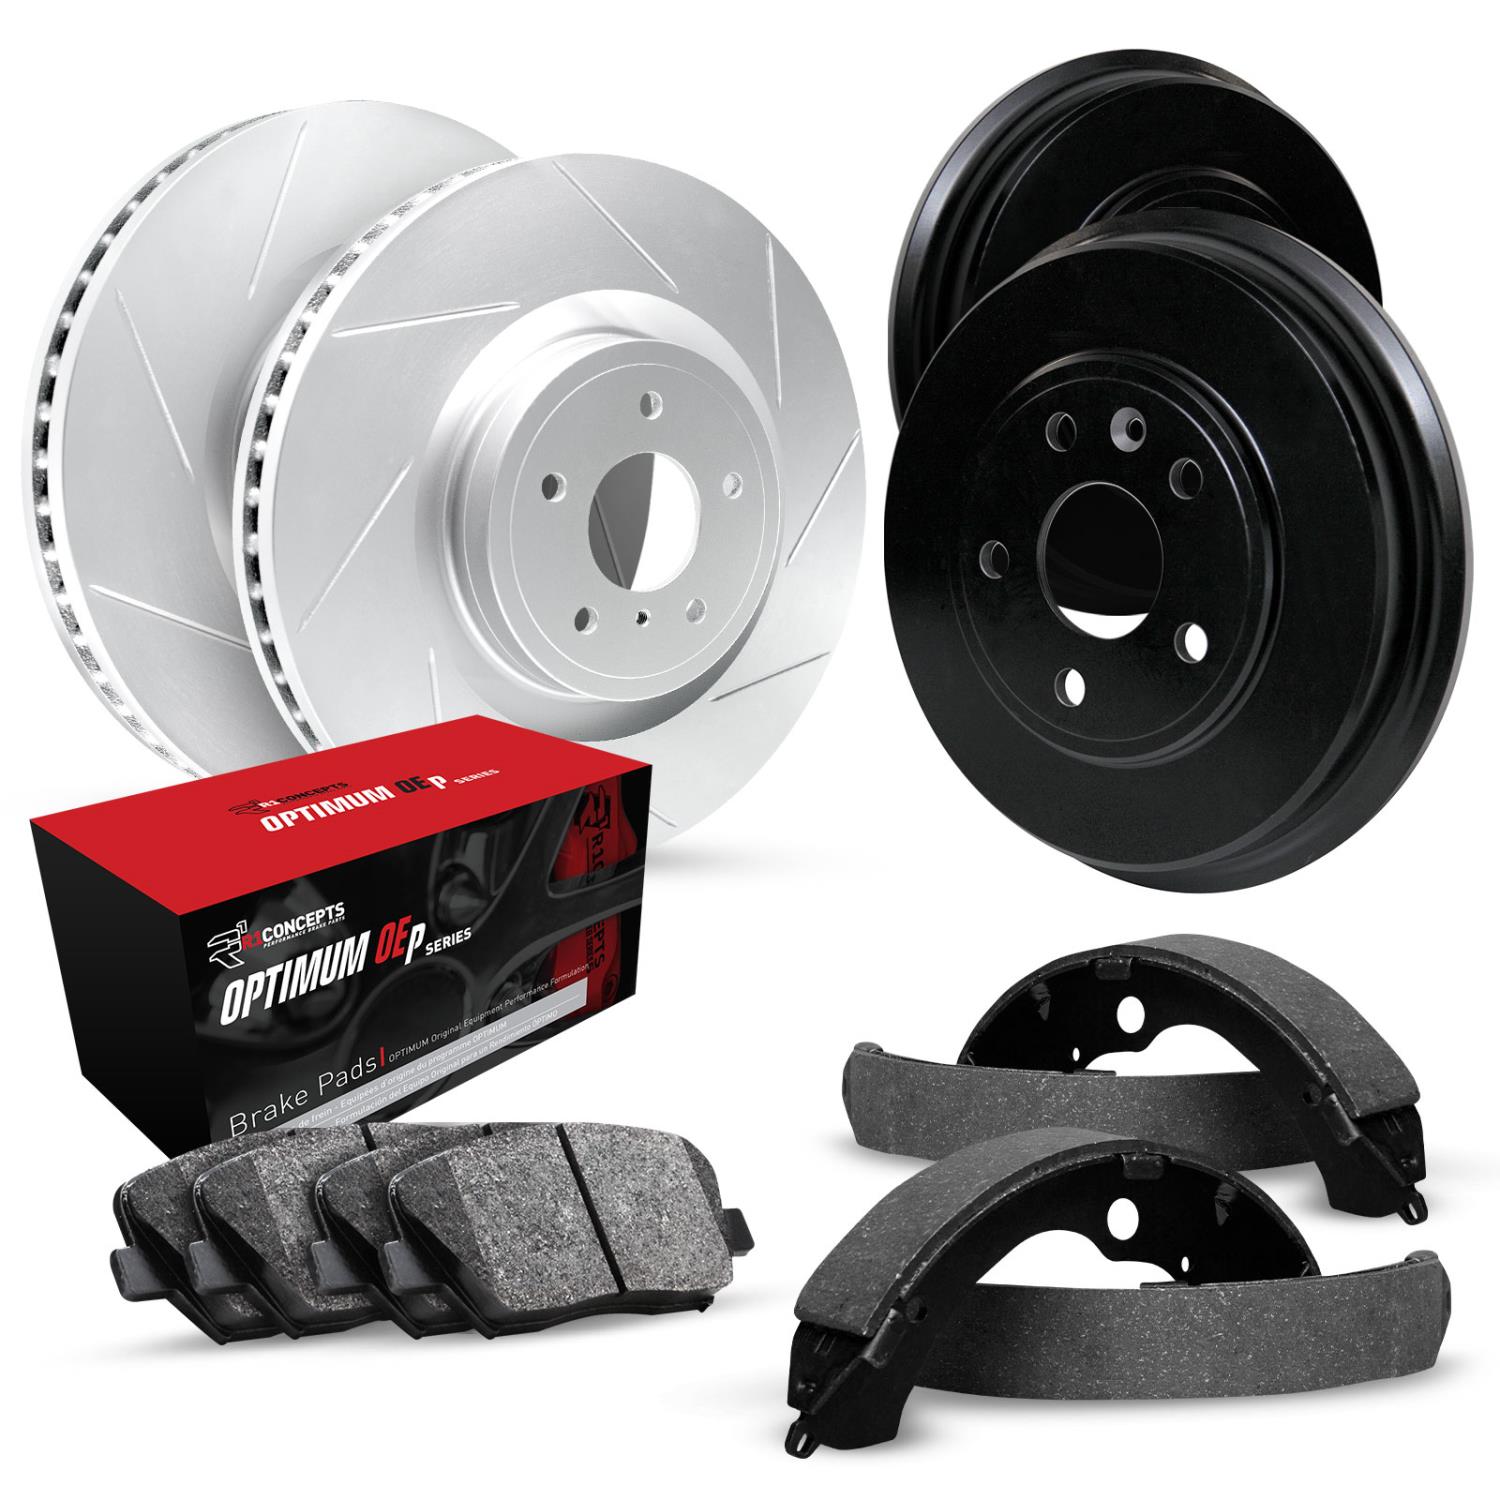 GEO-Carbon Slotted Brake Rotor & Drum Set w/Optimum OE Pads & Shoes, 1992-1998 Ford/Lincoln/Mercury/Mazda